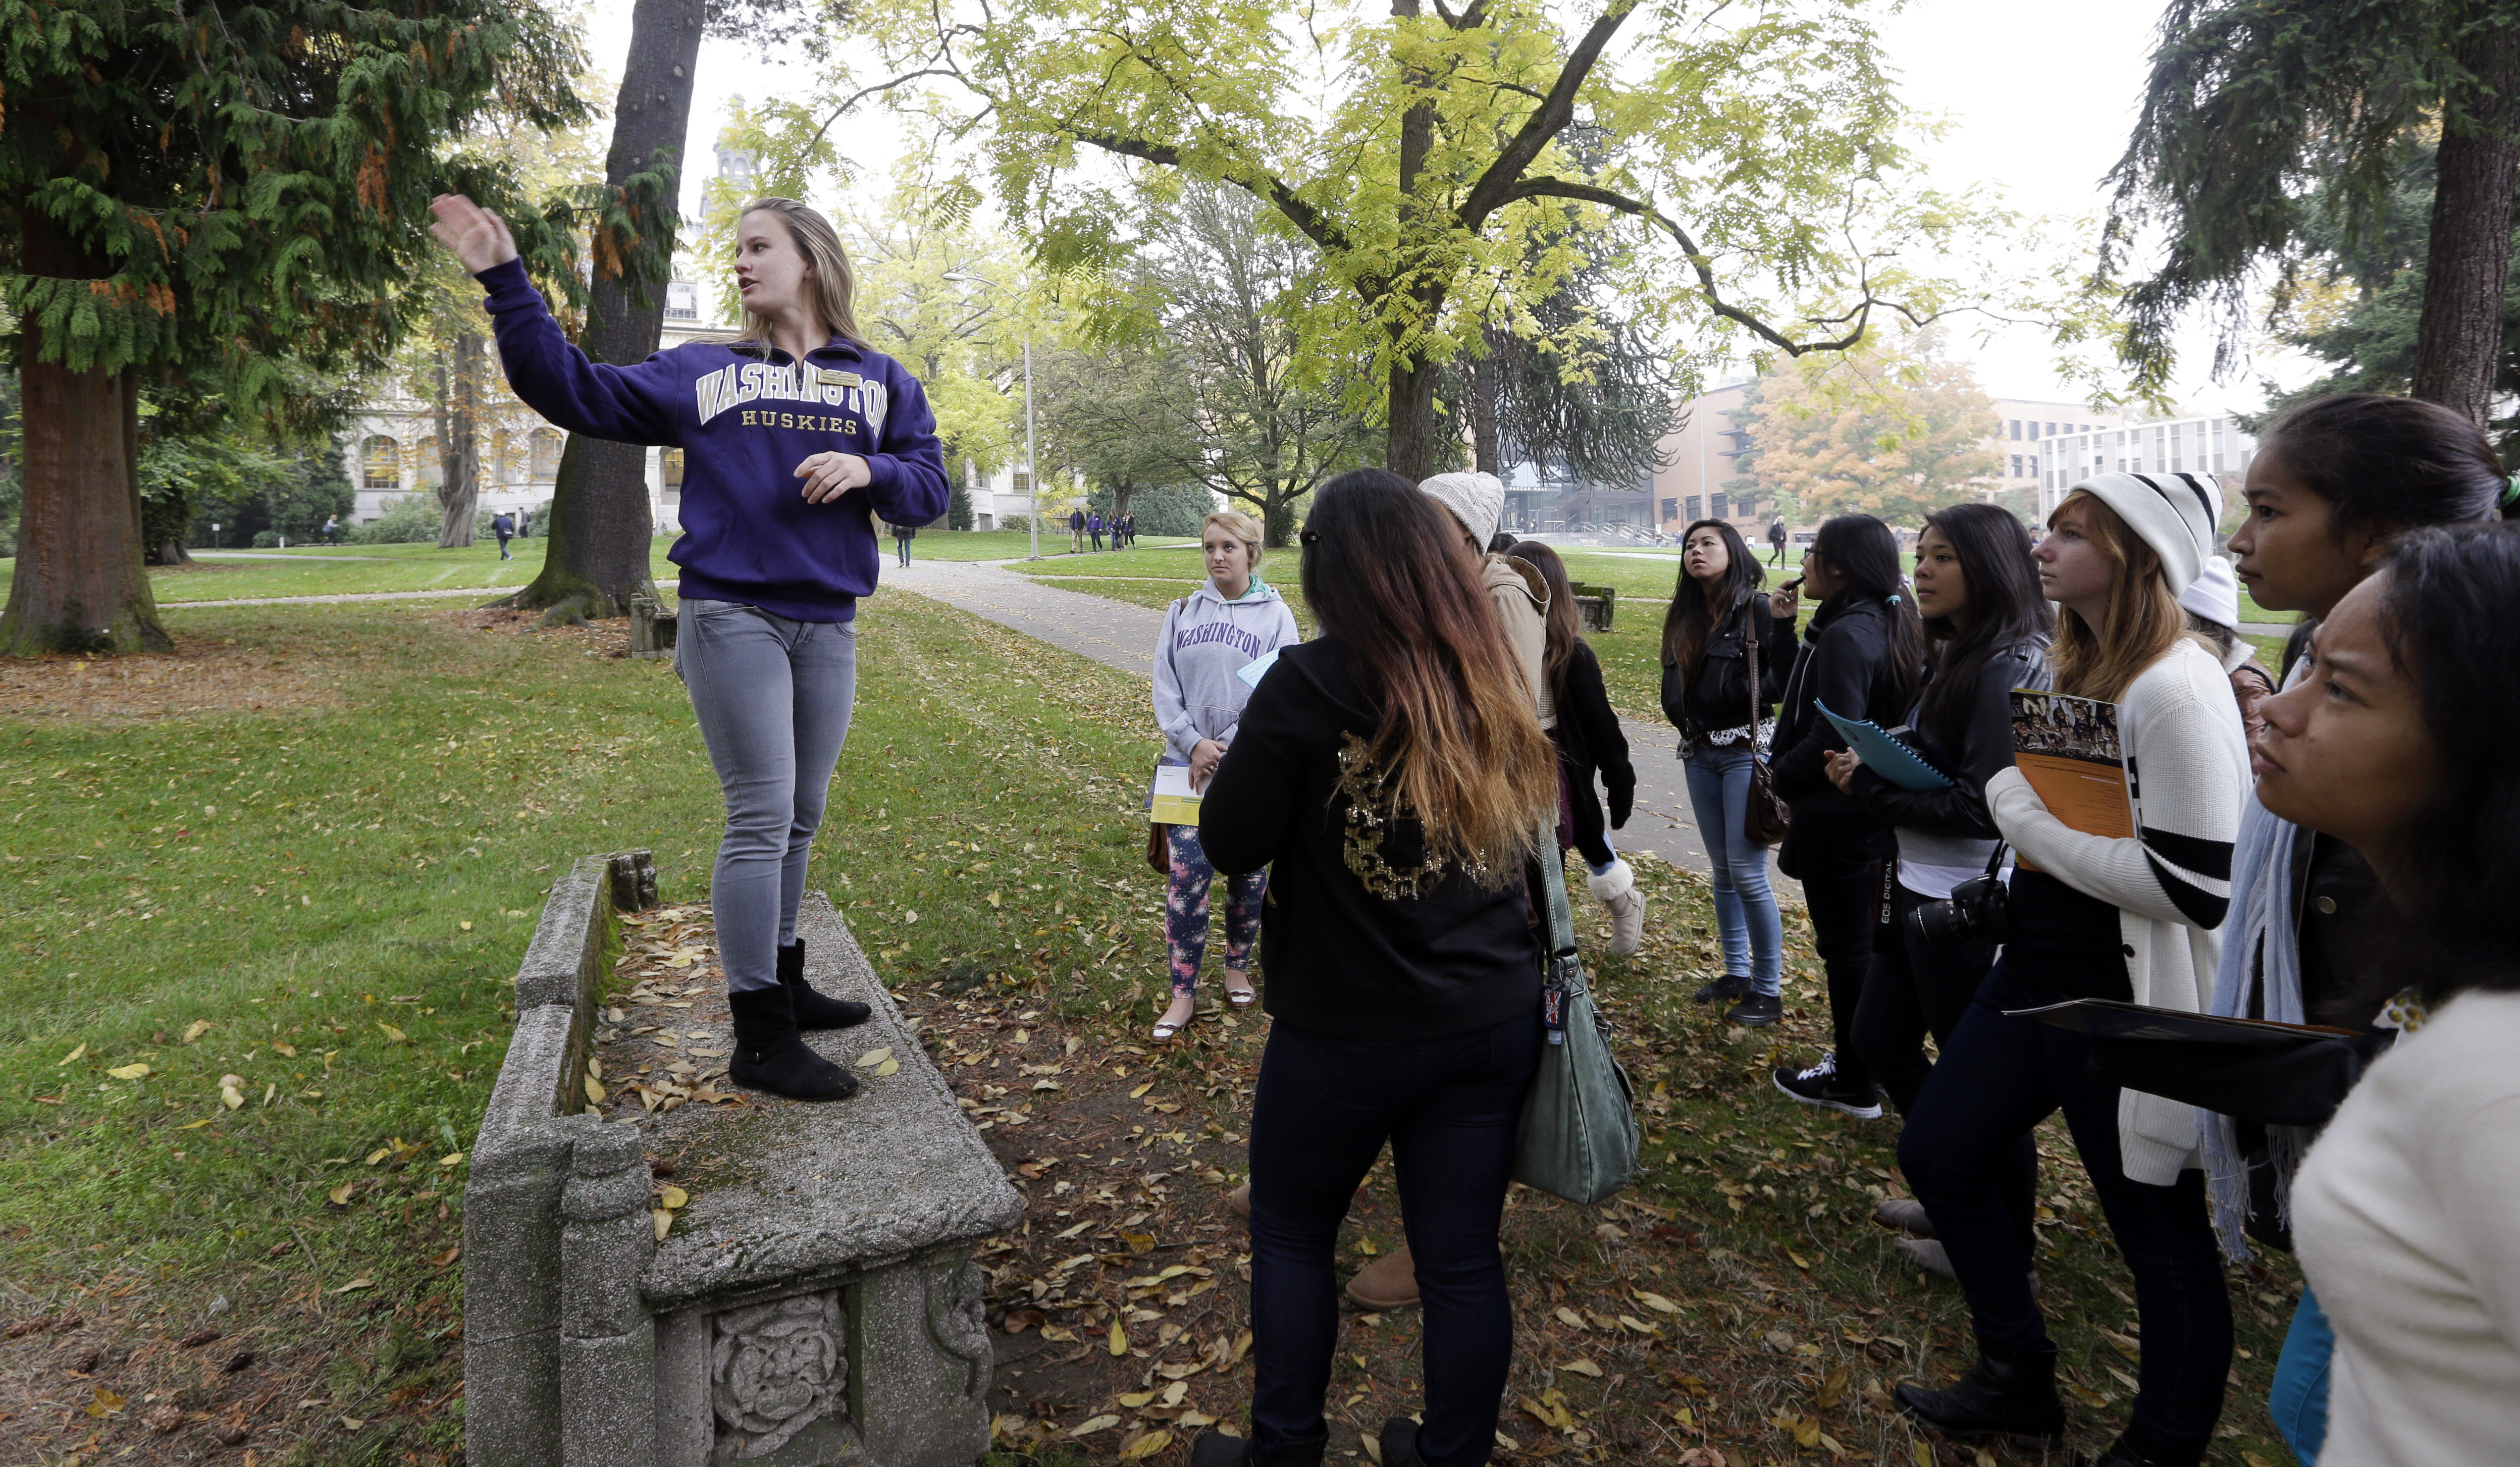 Ignore the Tour Guide: Unbiased Advice for Acing Campus Visits